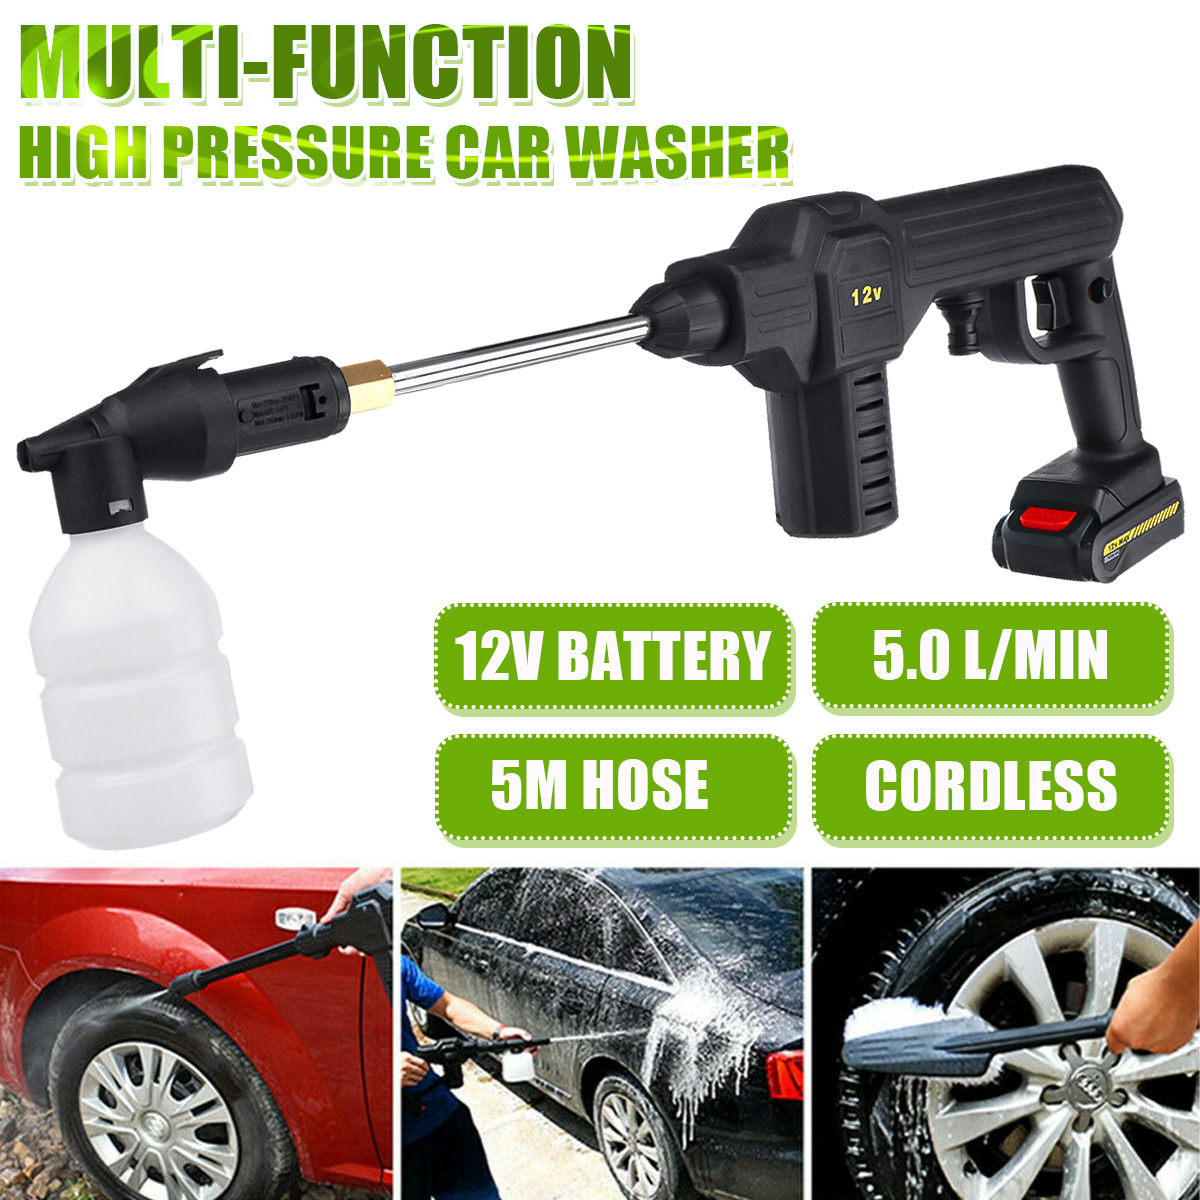 12V-High-Pressure-Cordless-Car-Washer-Washing-Spray-Guns-Water-Cleaner-With-12pcs-Battery-1827870-2